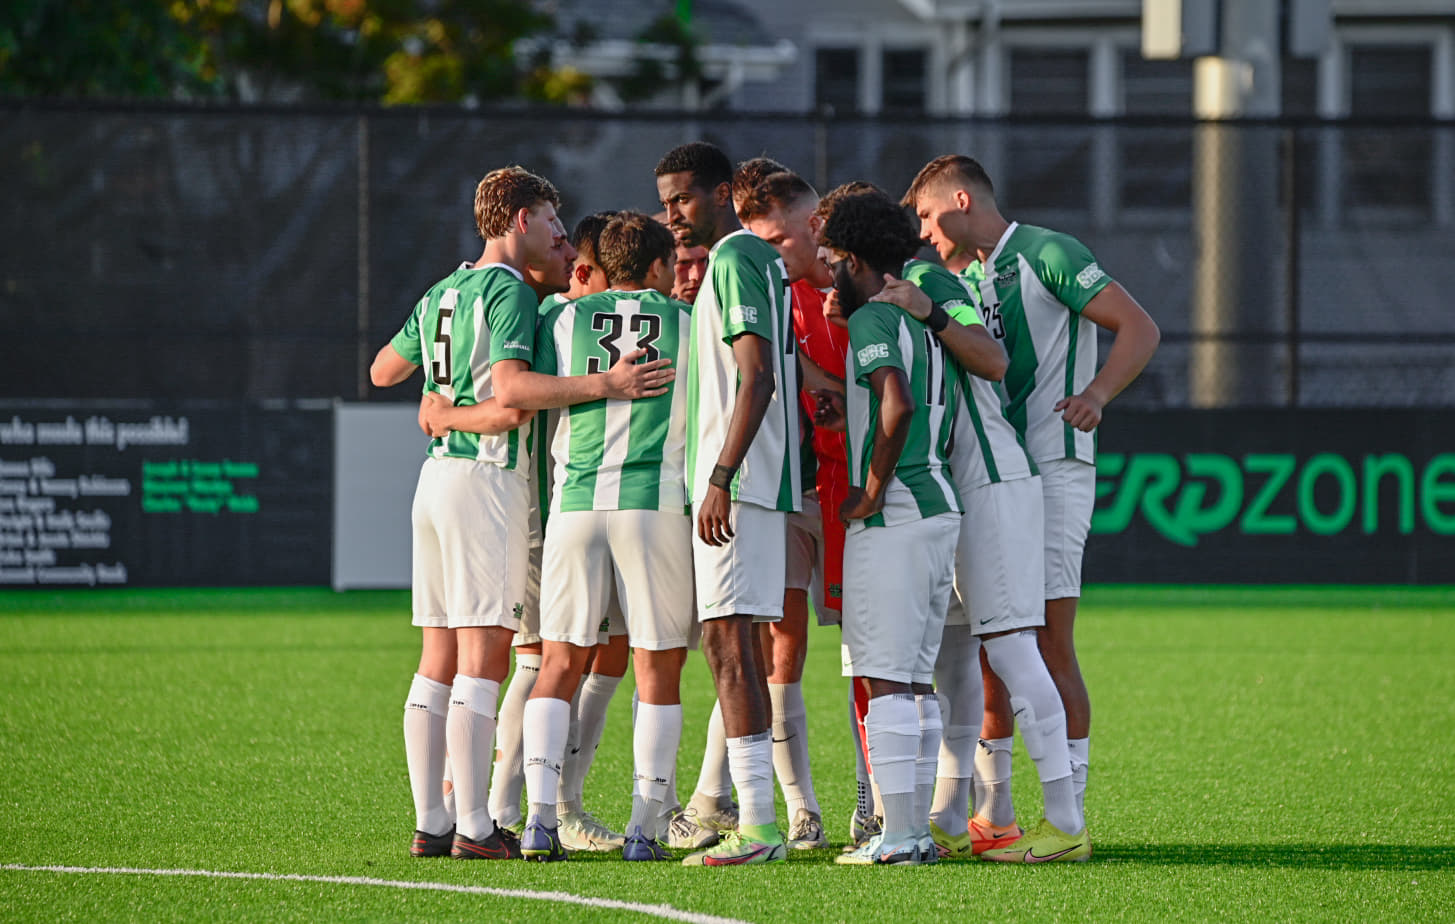 No. 14 Herd Men’s Soccer Opens 2022 Season With Dominating Win Over VCU